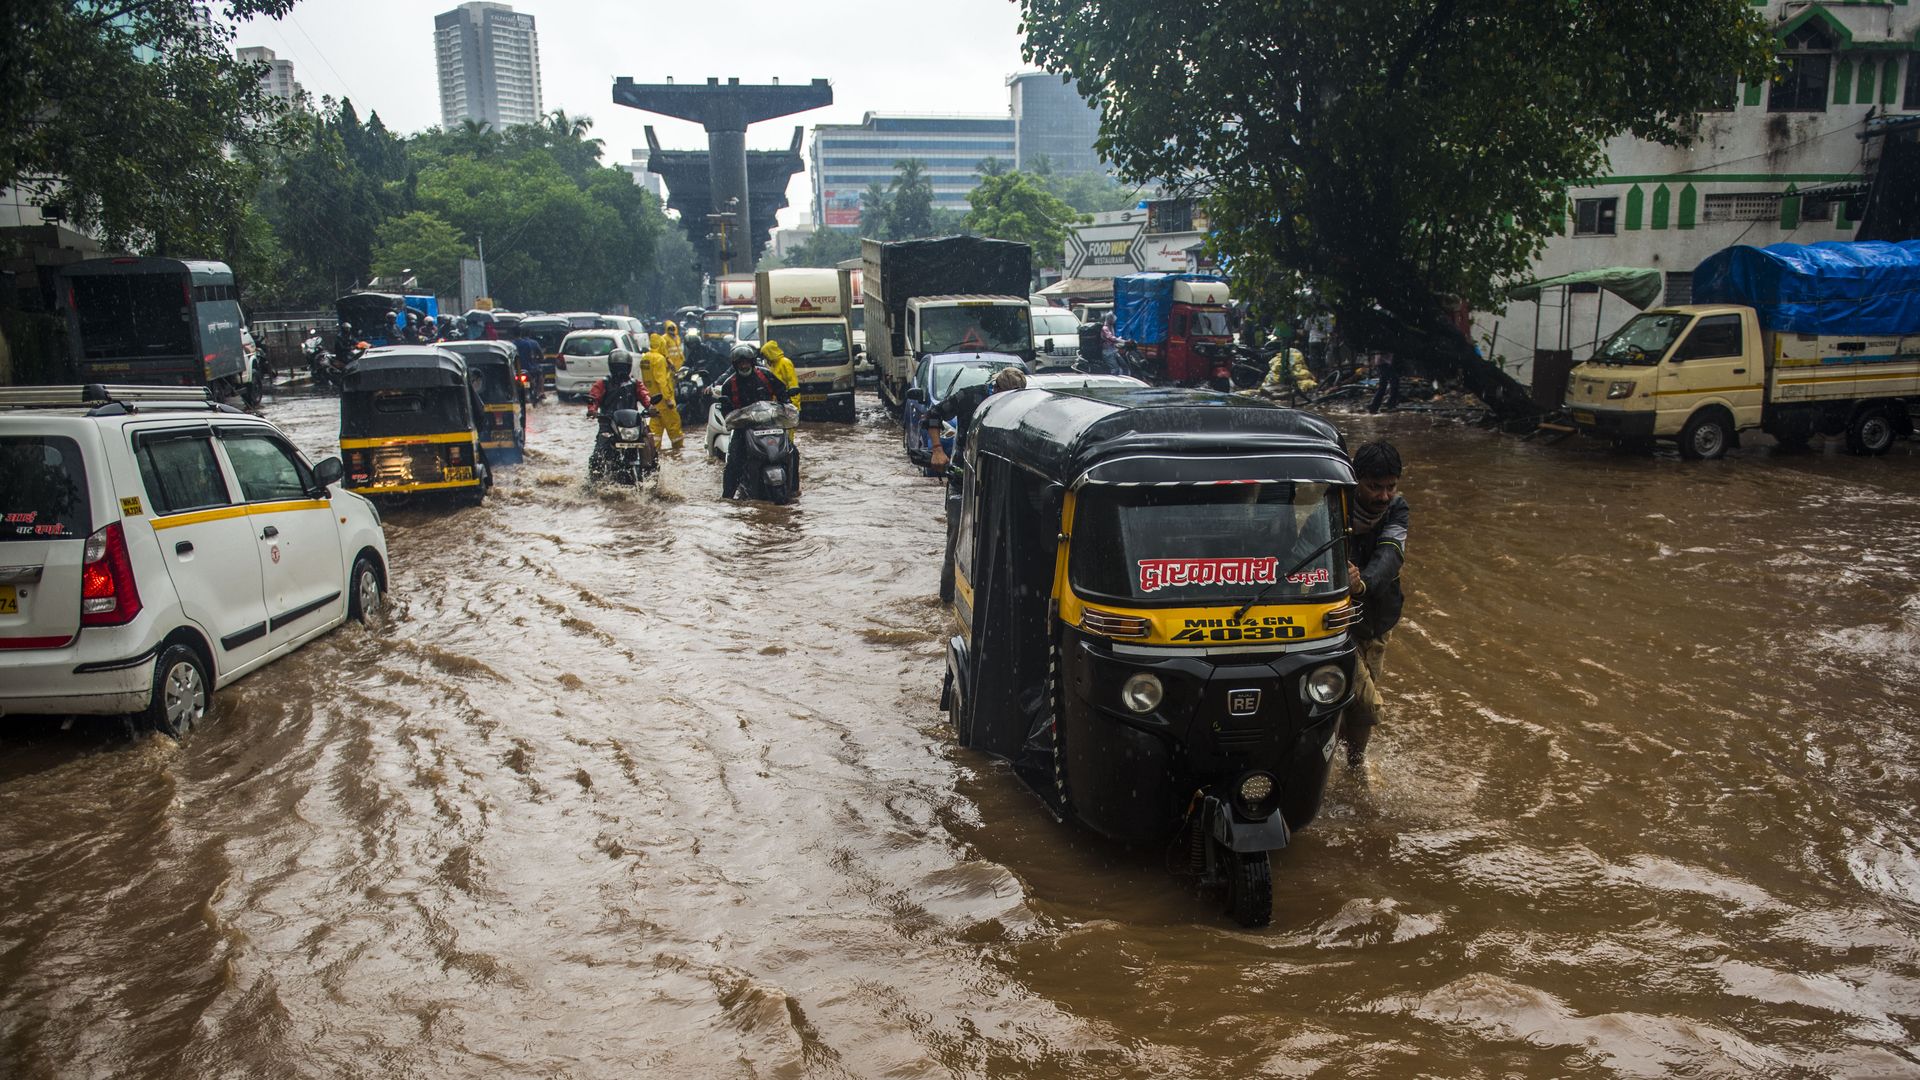 Vehicles driving through a flooded street in Mumbai on July 19.